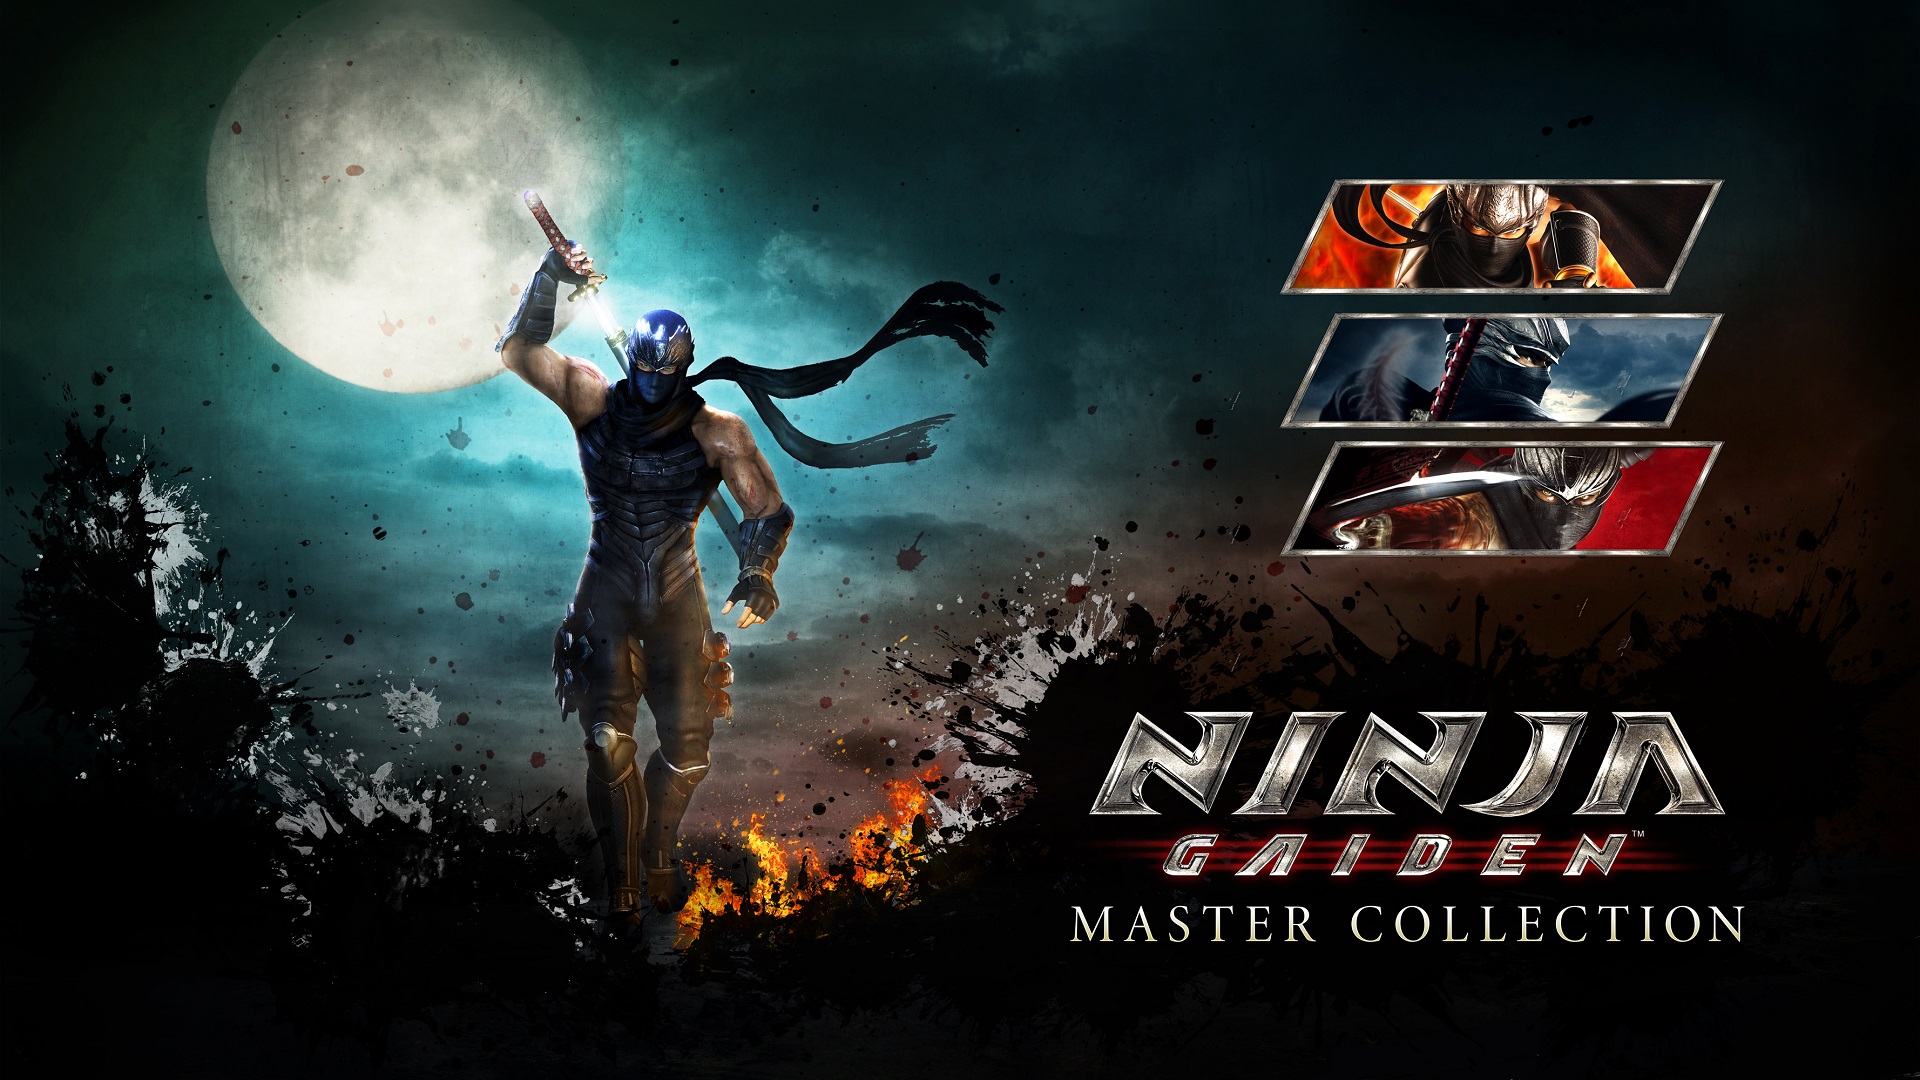 Ninja Gaiden: Master Collection Announced for PC and Consoles